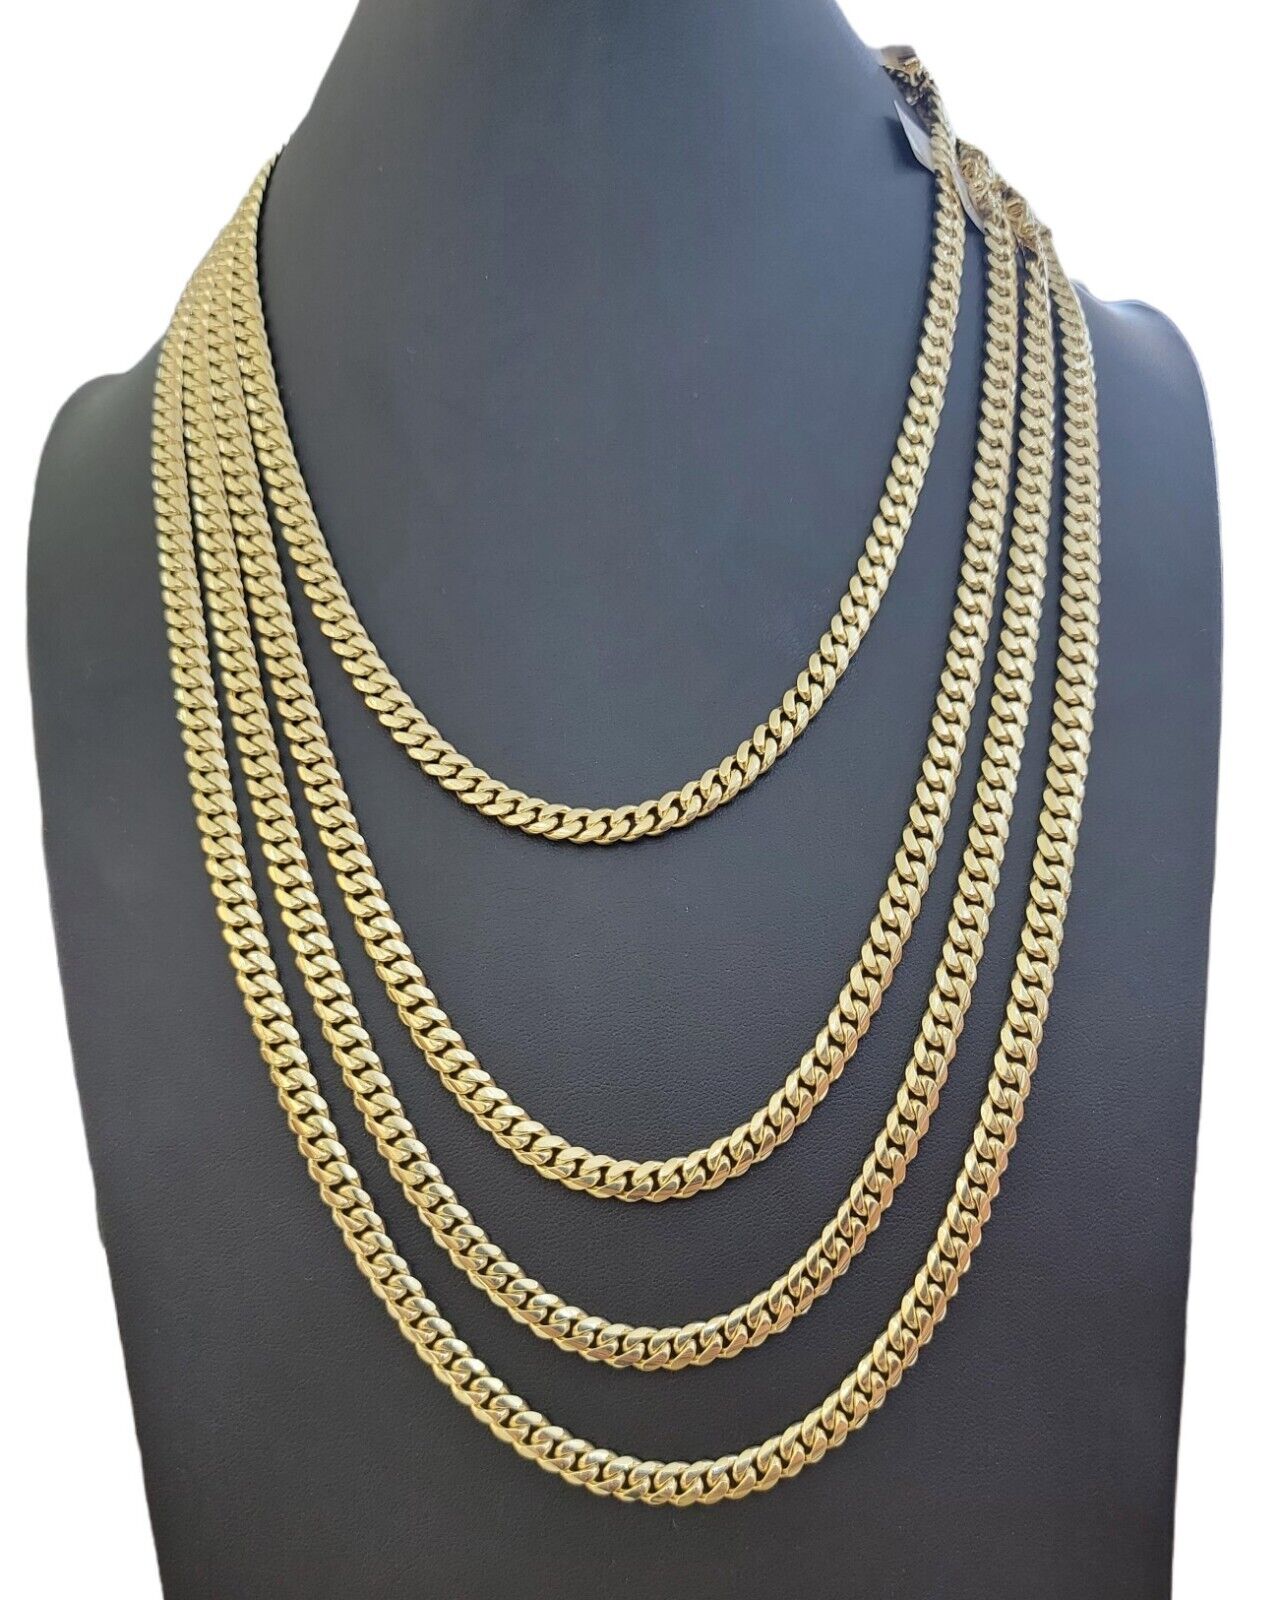 Real 14k Yellow Gold Miami Cuban Link Chain Necklace 6mm 20"- 30" 14kt SOLID